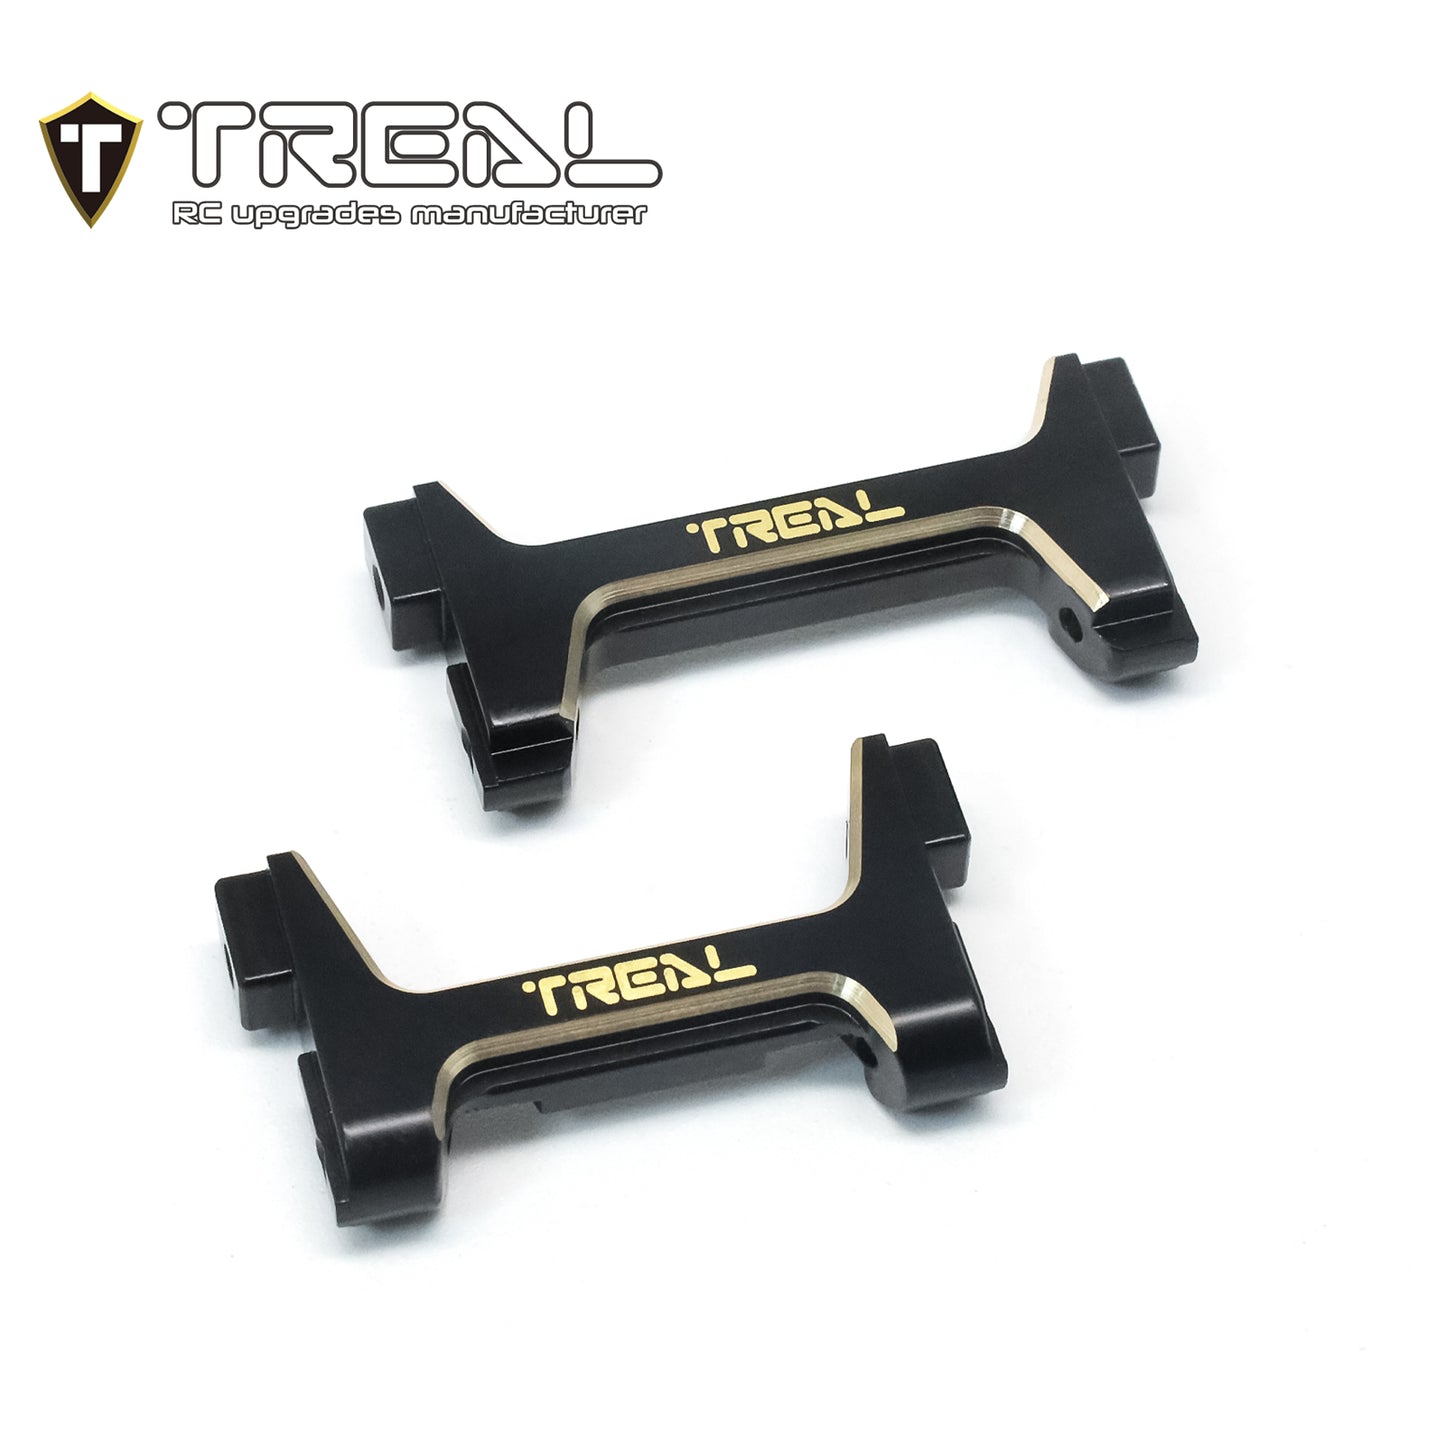 TREAL Brass Front and Rear Bumper Mounts Set (F&R) Heavy Weight Upgrades for 1/18 TRX4M